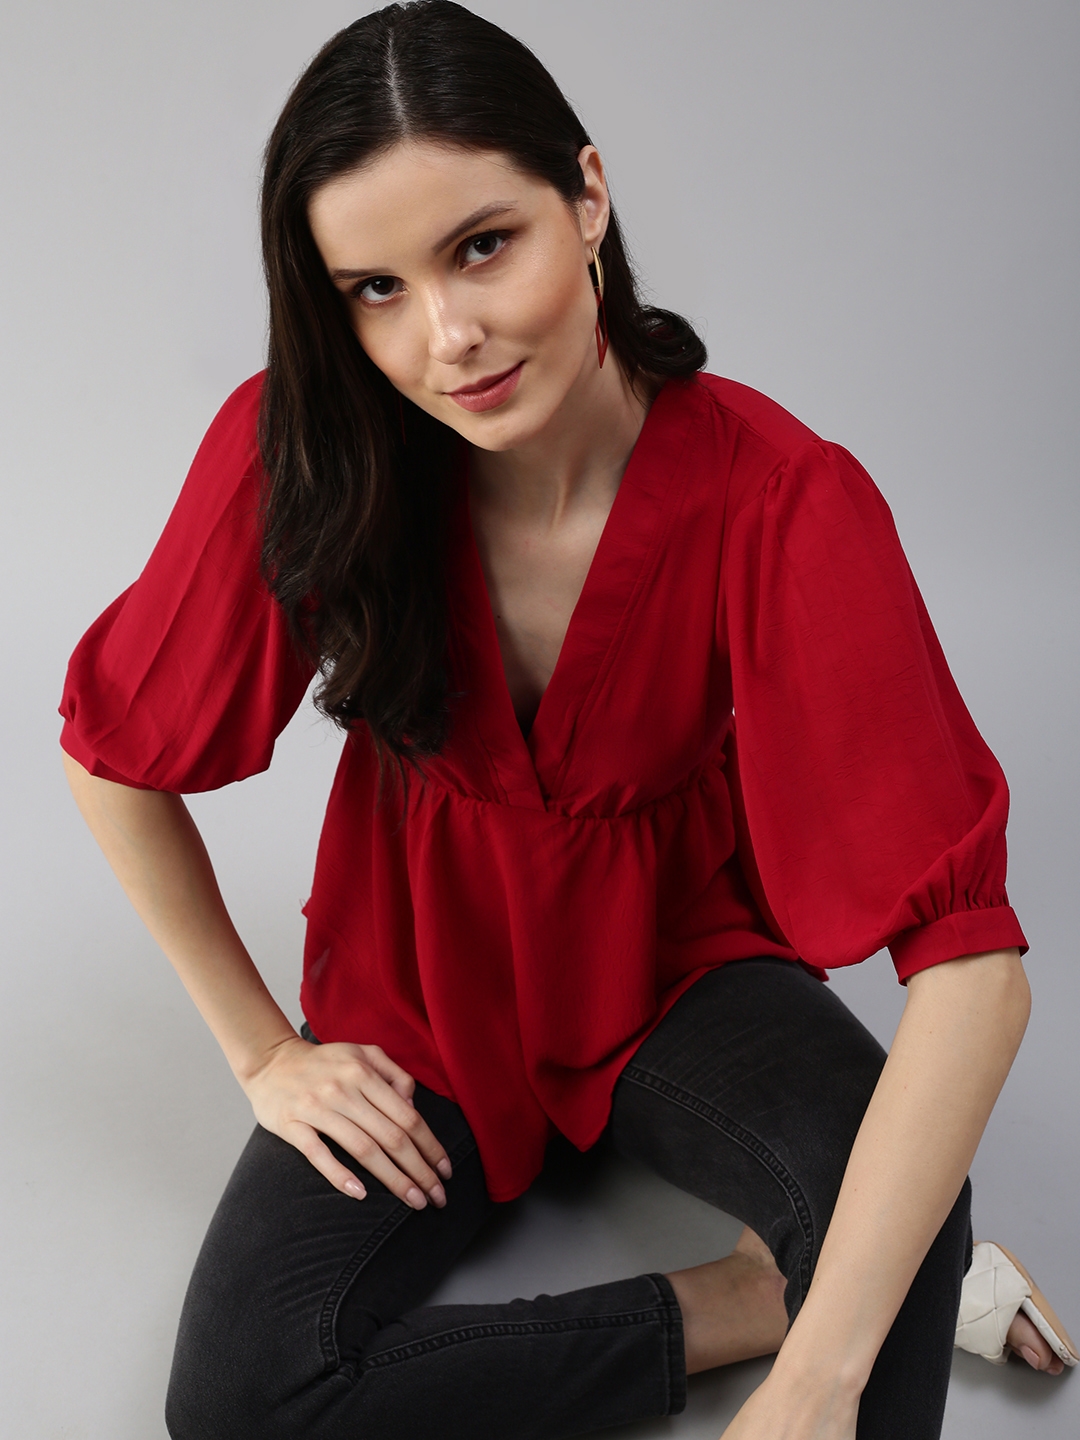 SHOWOFF Women's Solid Peplum Red V-Neck Top